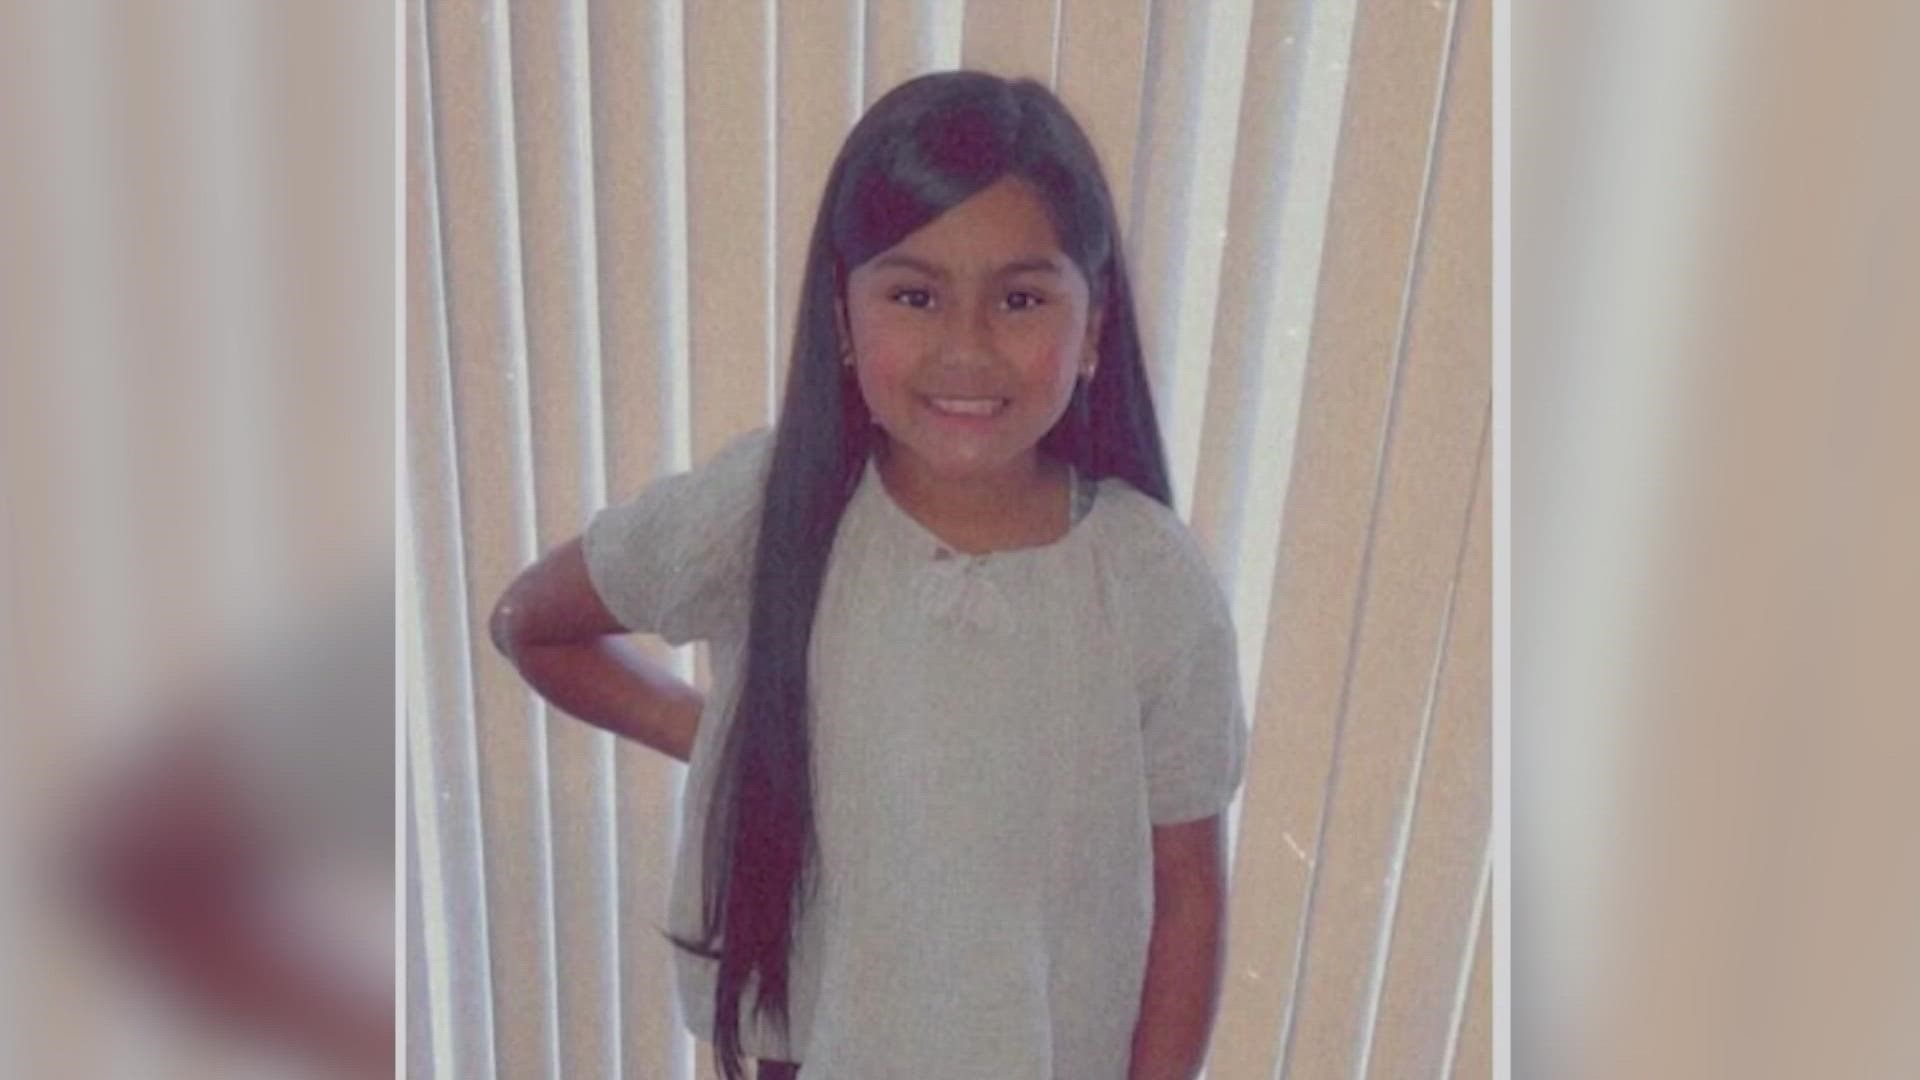 Maite Rodriguez's family said she was smart and kind, and wanted to be a marine biologist. Amerie Jo Garza called 911, and wanted to be an art teacher.